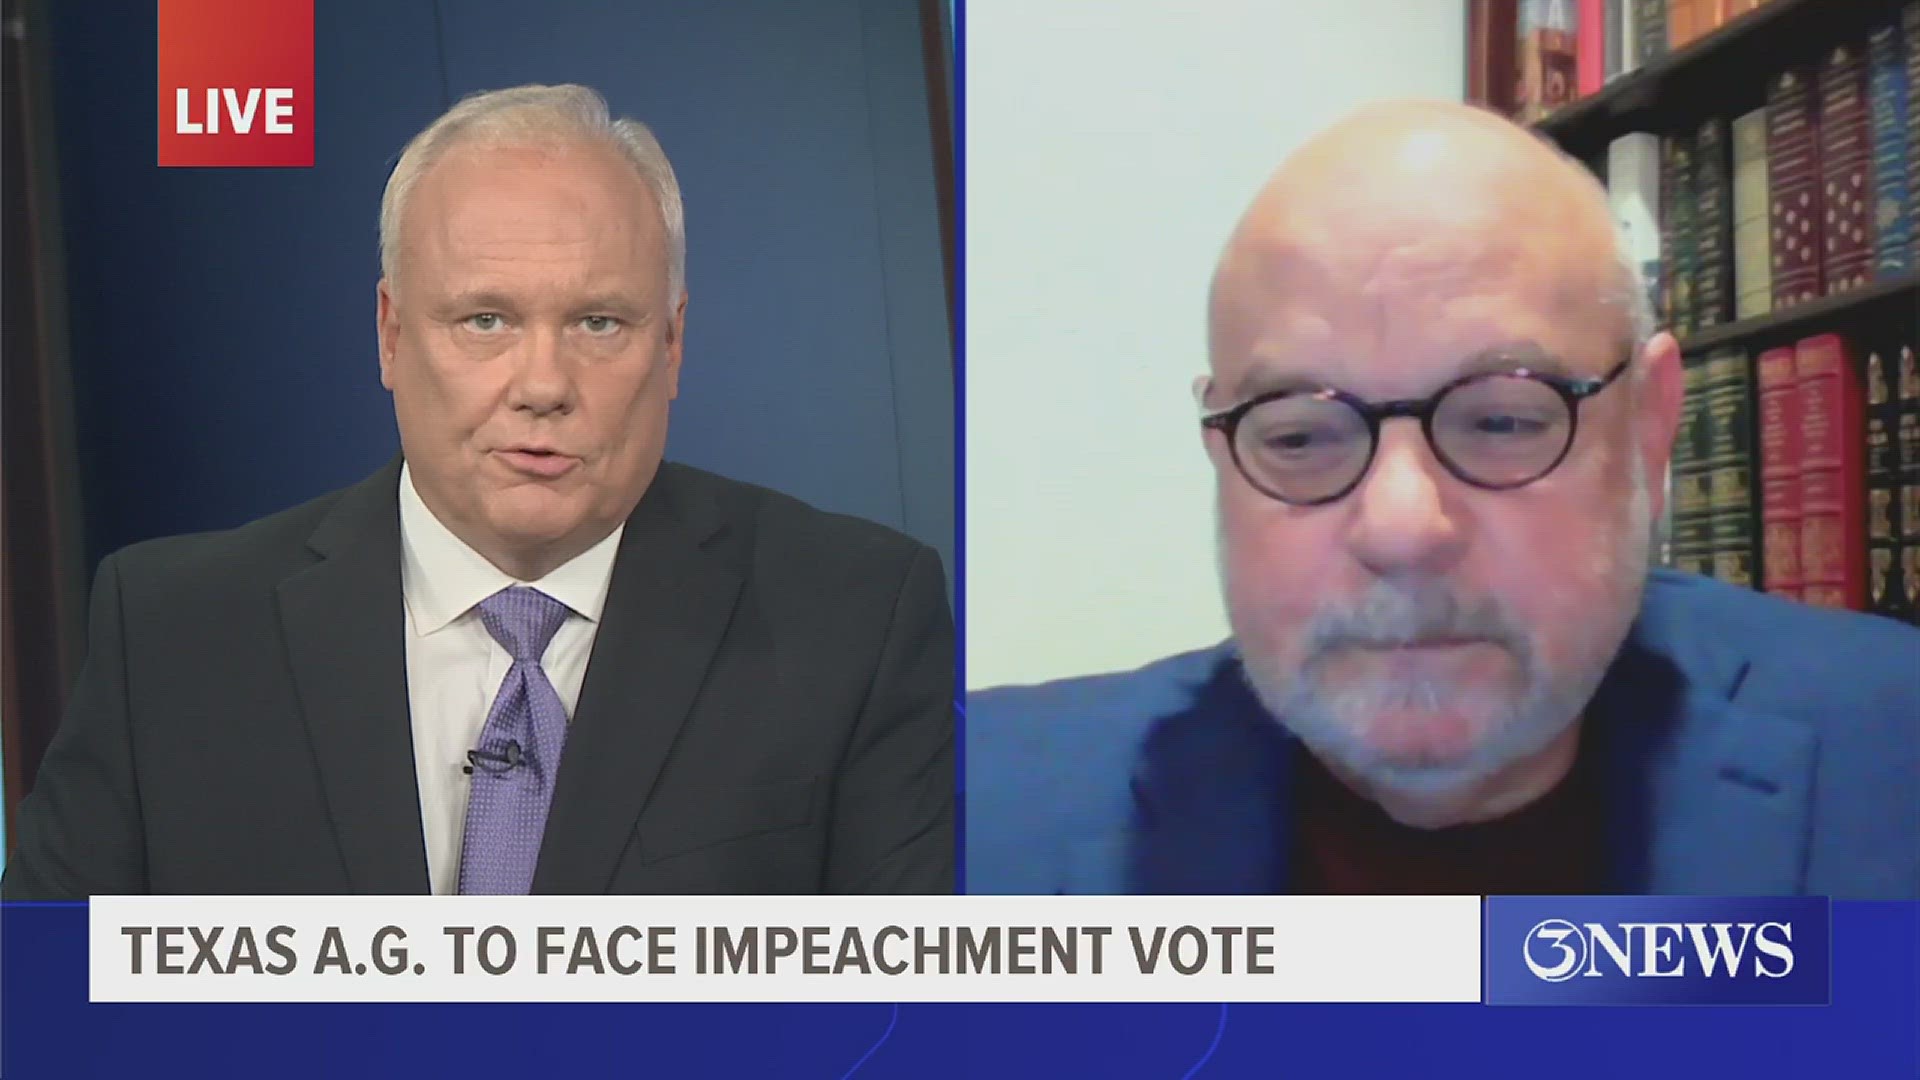 3NEWS brought in a political analyst who broke down what impeachment means for Paxton.